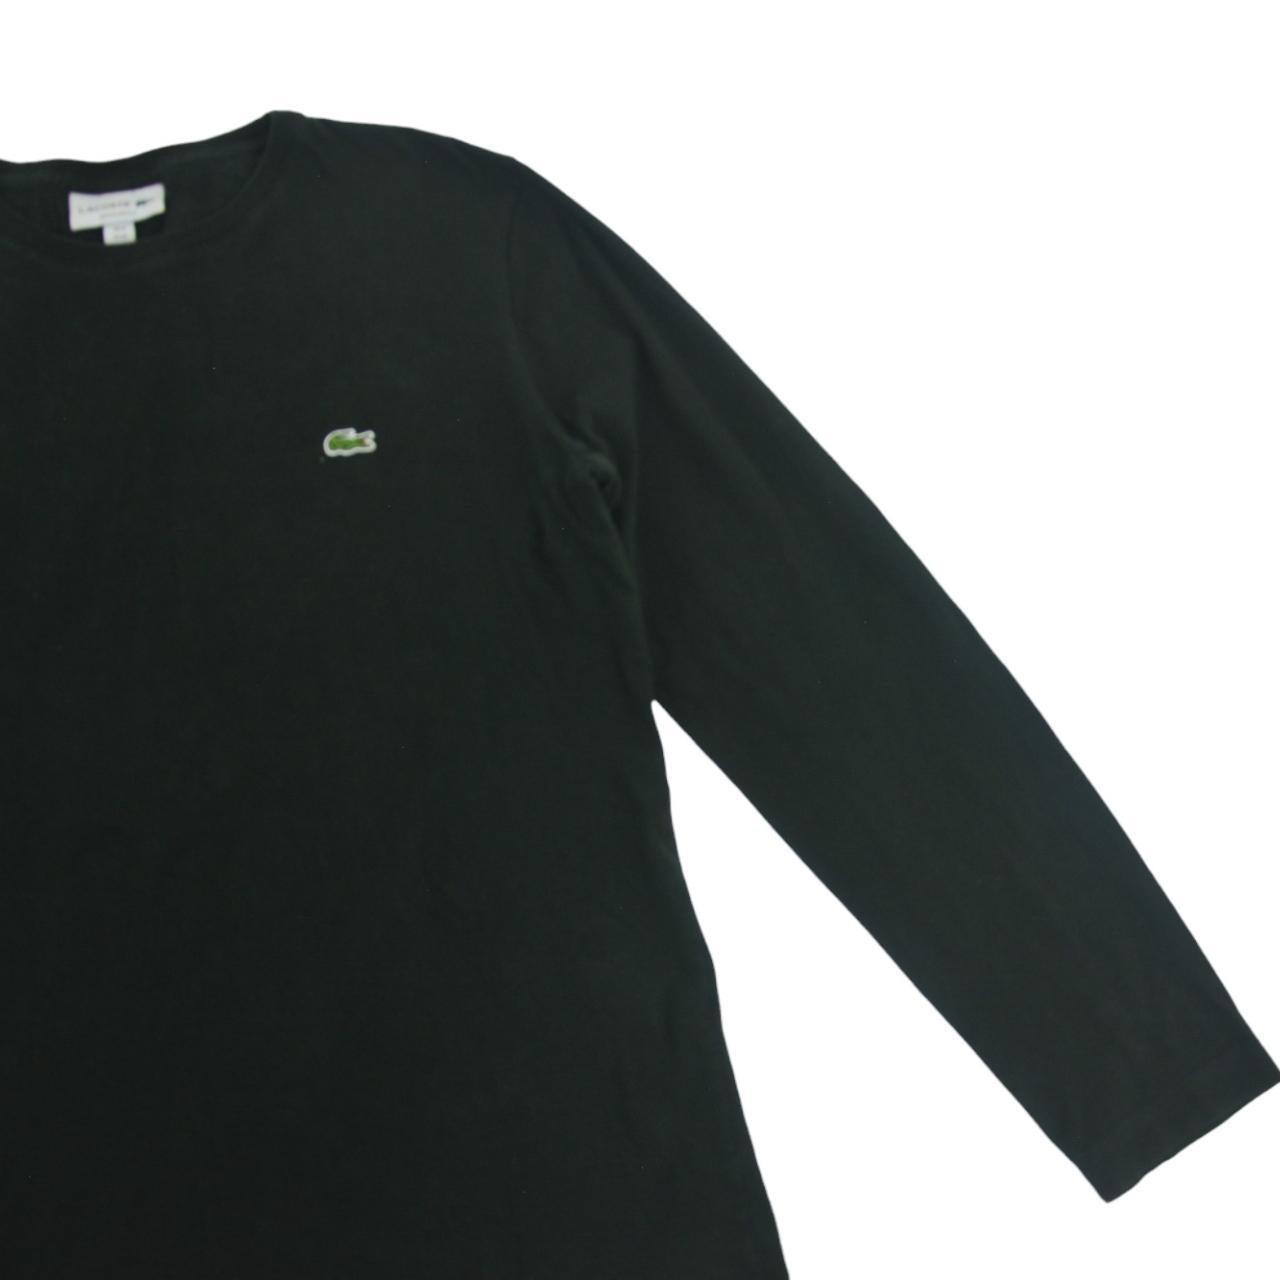 Vintage Lacoste Long Sleeve T Shirt Size S - Known Source